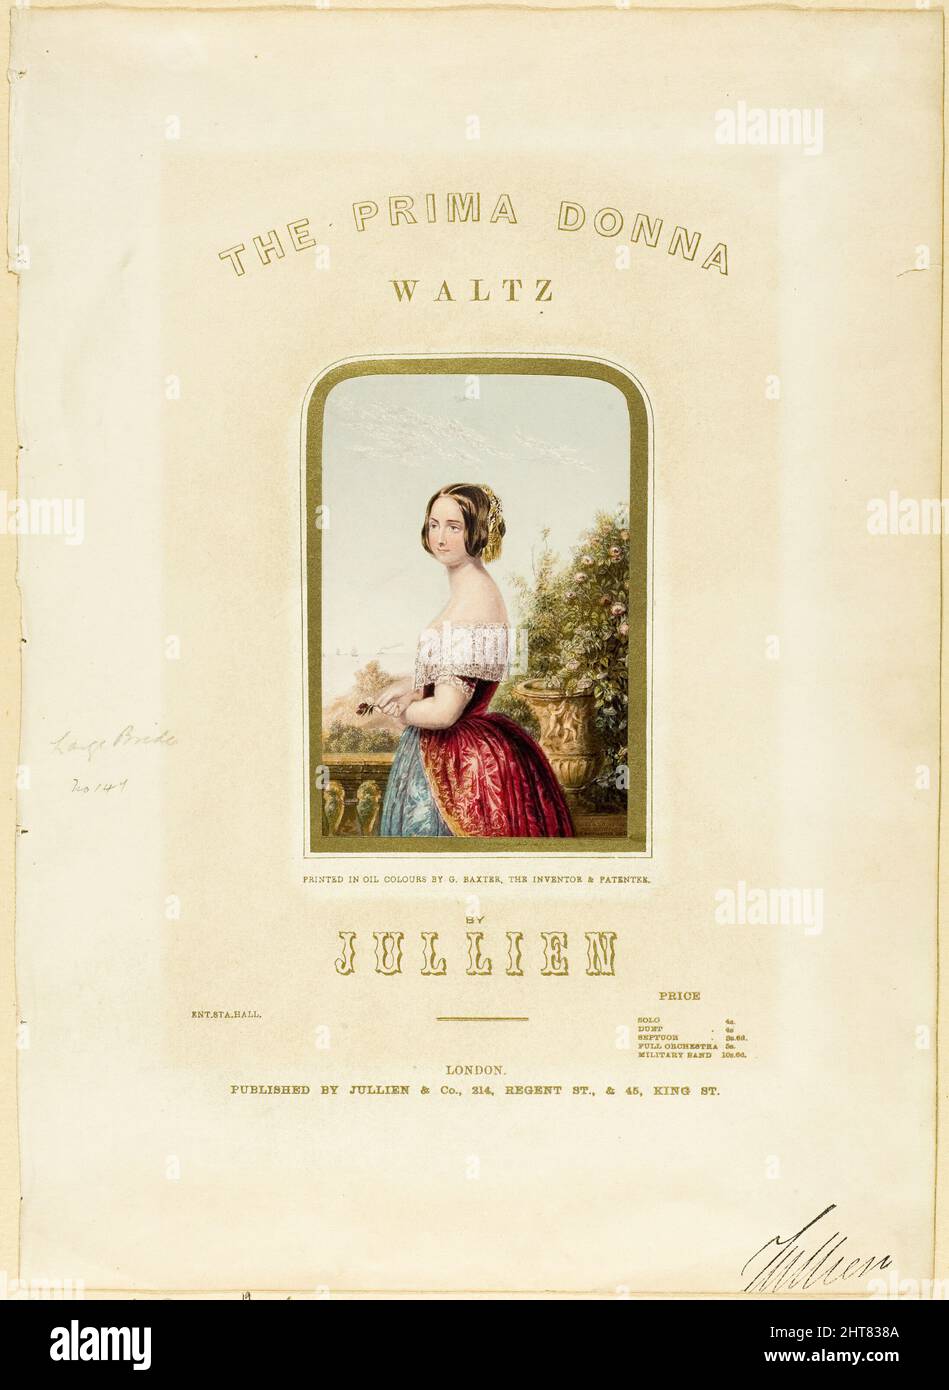 The Bride, cover for The Prima Donna Waltz sheet music, 1850. Stock Photo